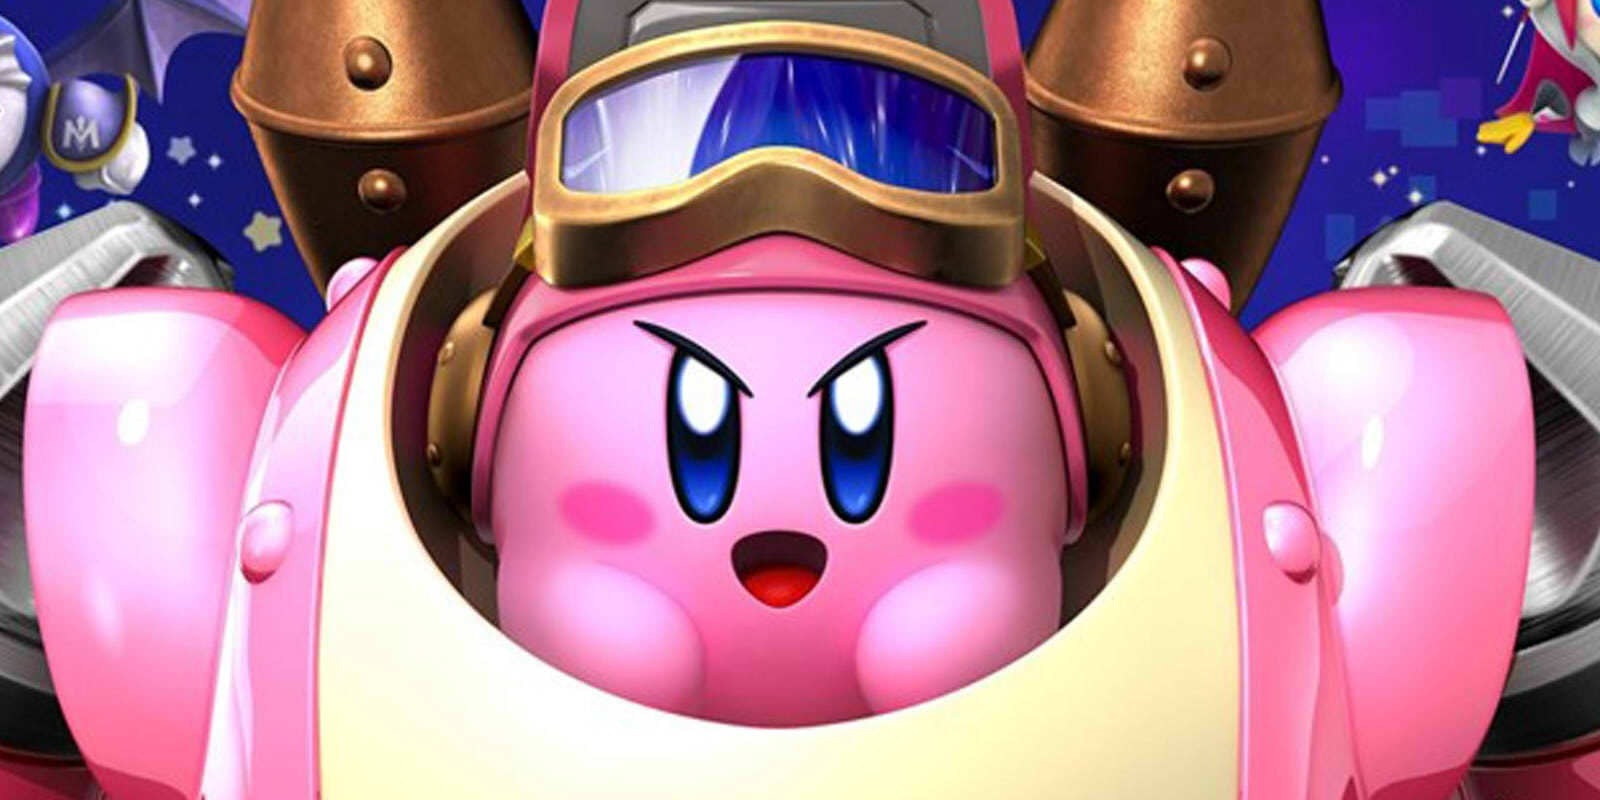 'Team Kirby Clash Deluxe', 'Kirby's Blowout Blast' confirmados para 3DS